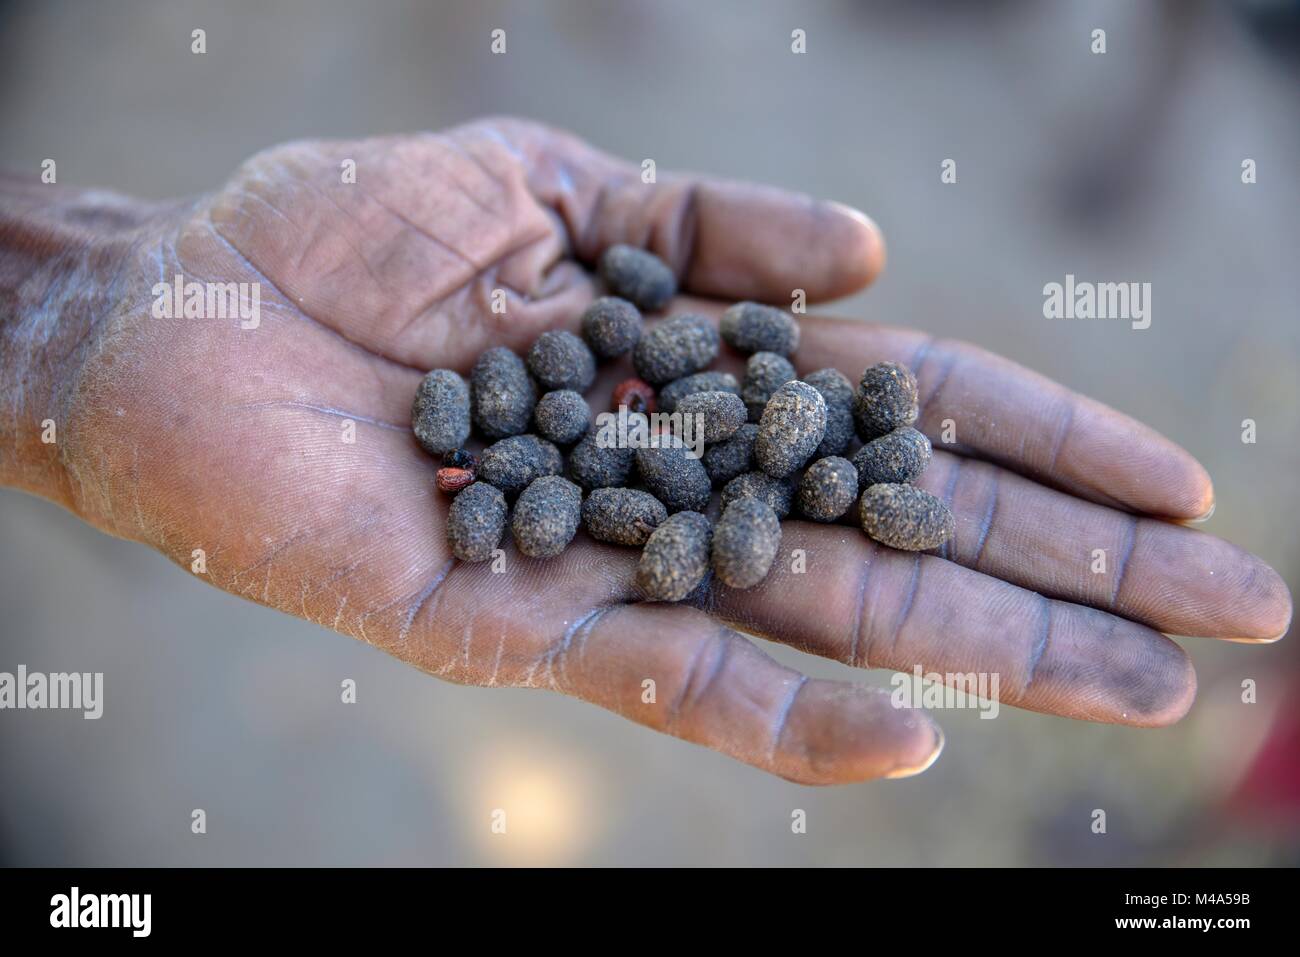 Cocoons,Bushman arrow-poison beetle (Diamphidia nigroornata) in the hands of a Bushman,for the production of arrow poison Stock Photo